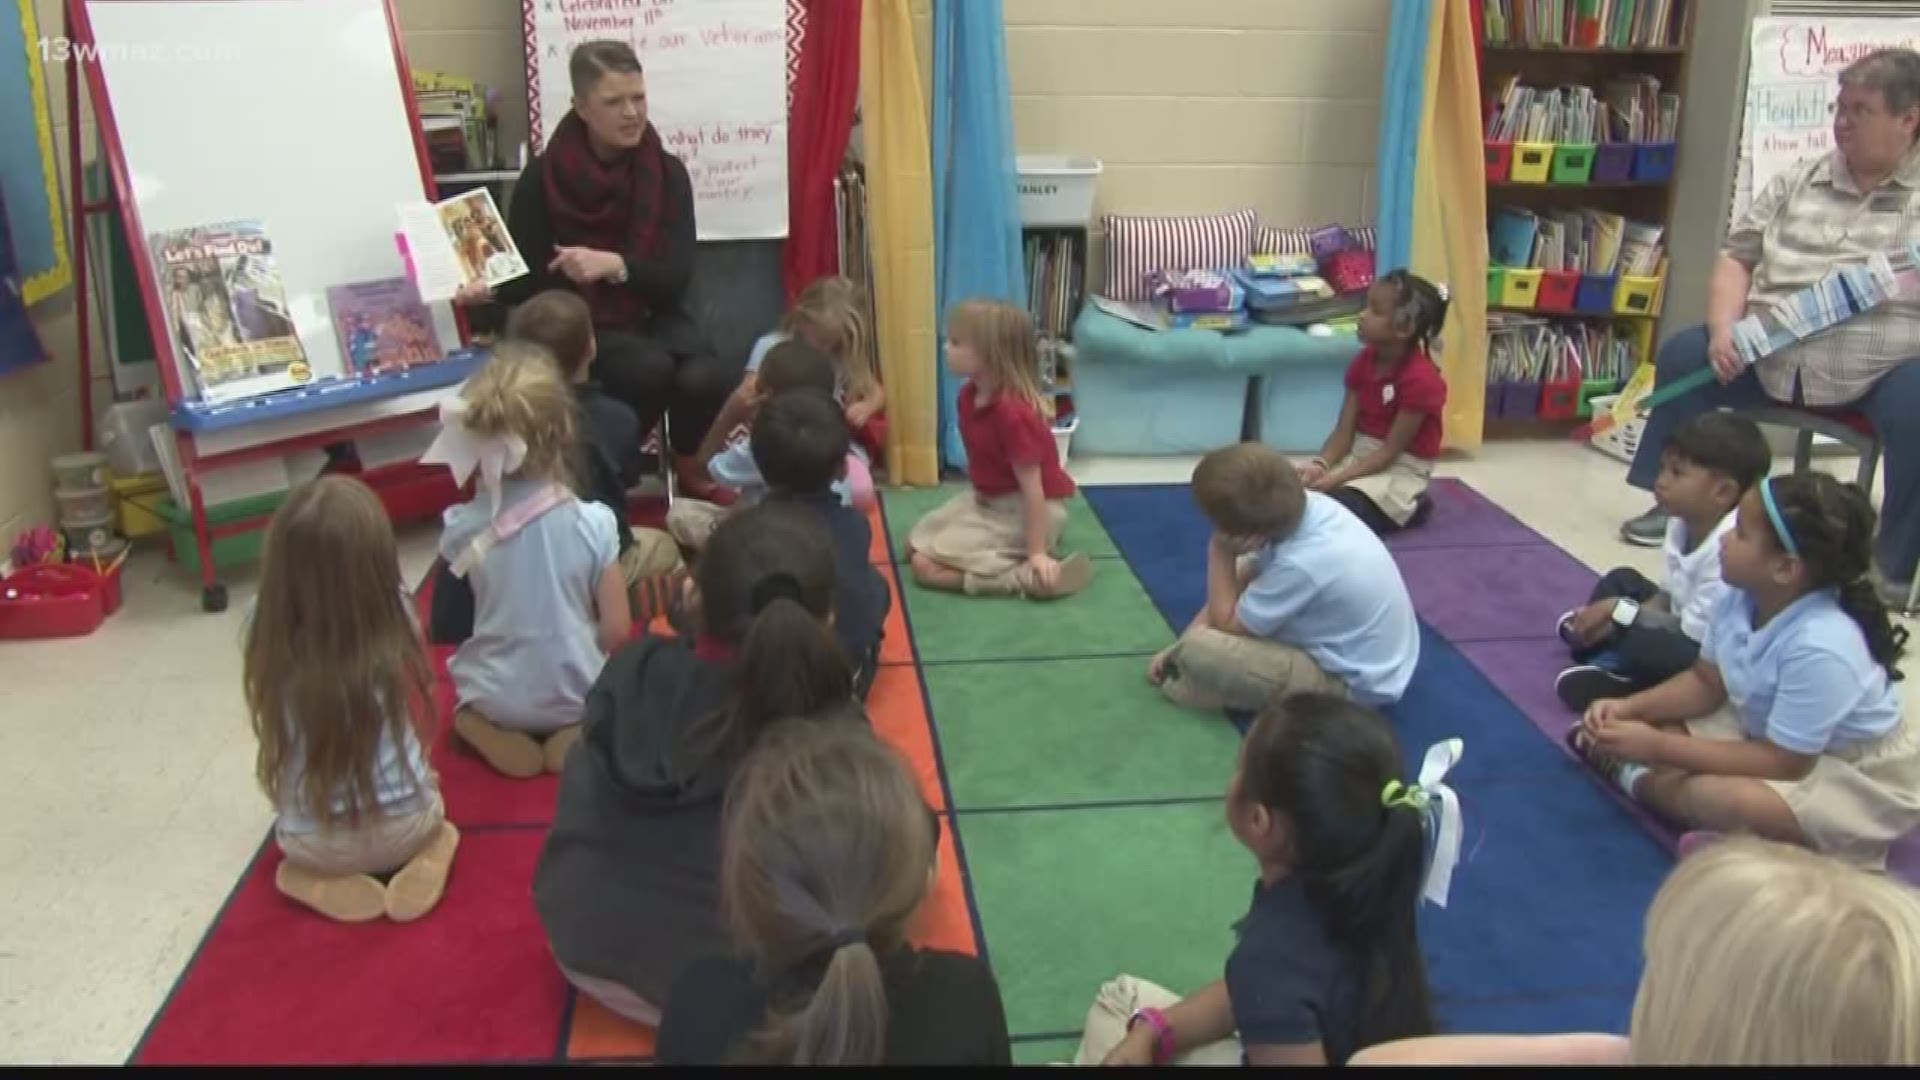 The Baldwin County School District wants to pay some parents who are willing to help their neighbors get more involved with their children's school. Pepper Baker explains what they're looking for and whether you qualify.